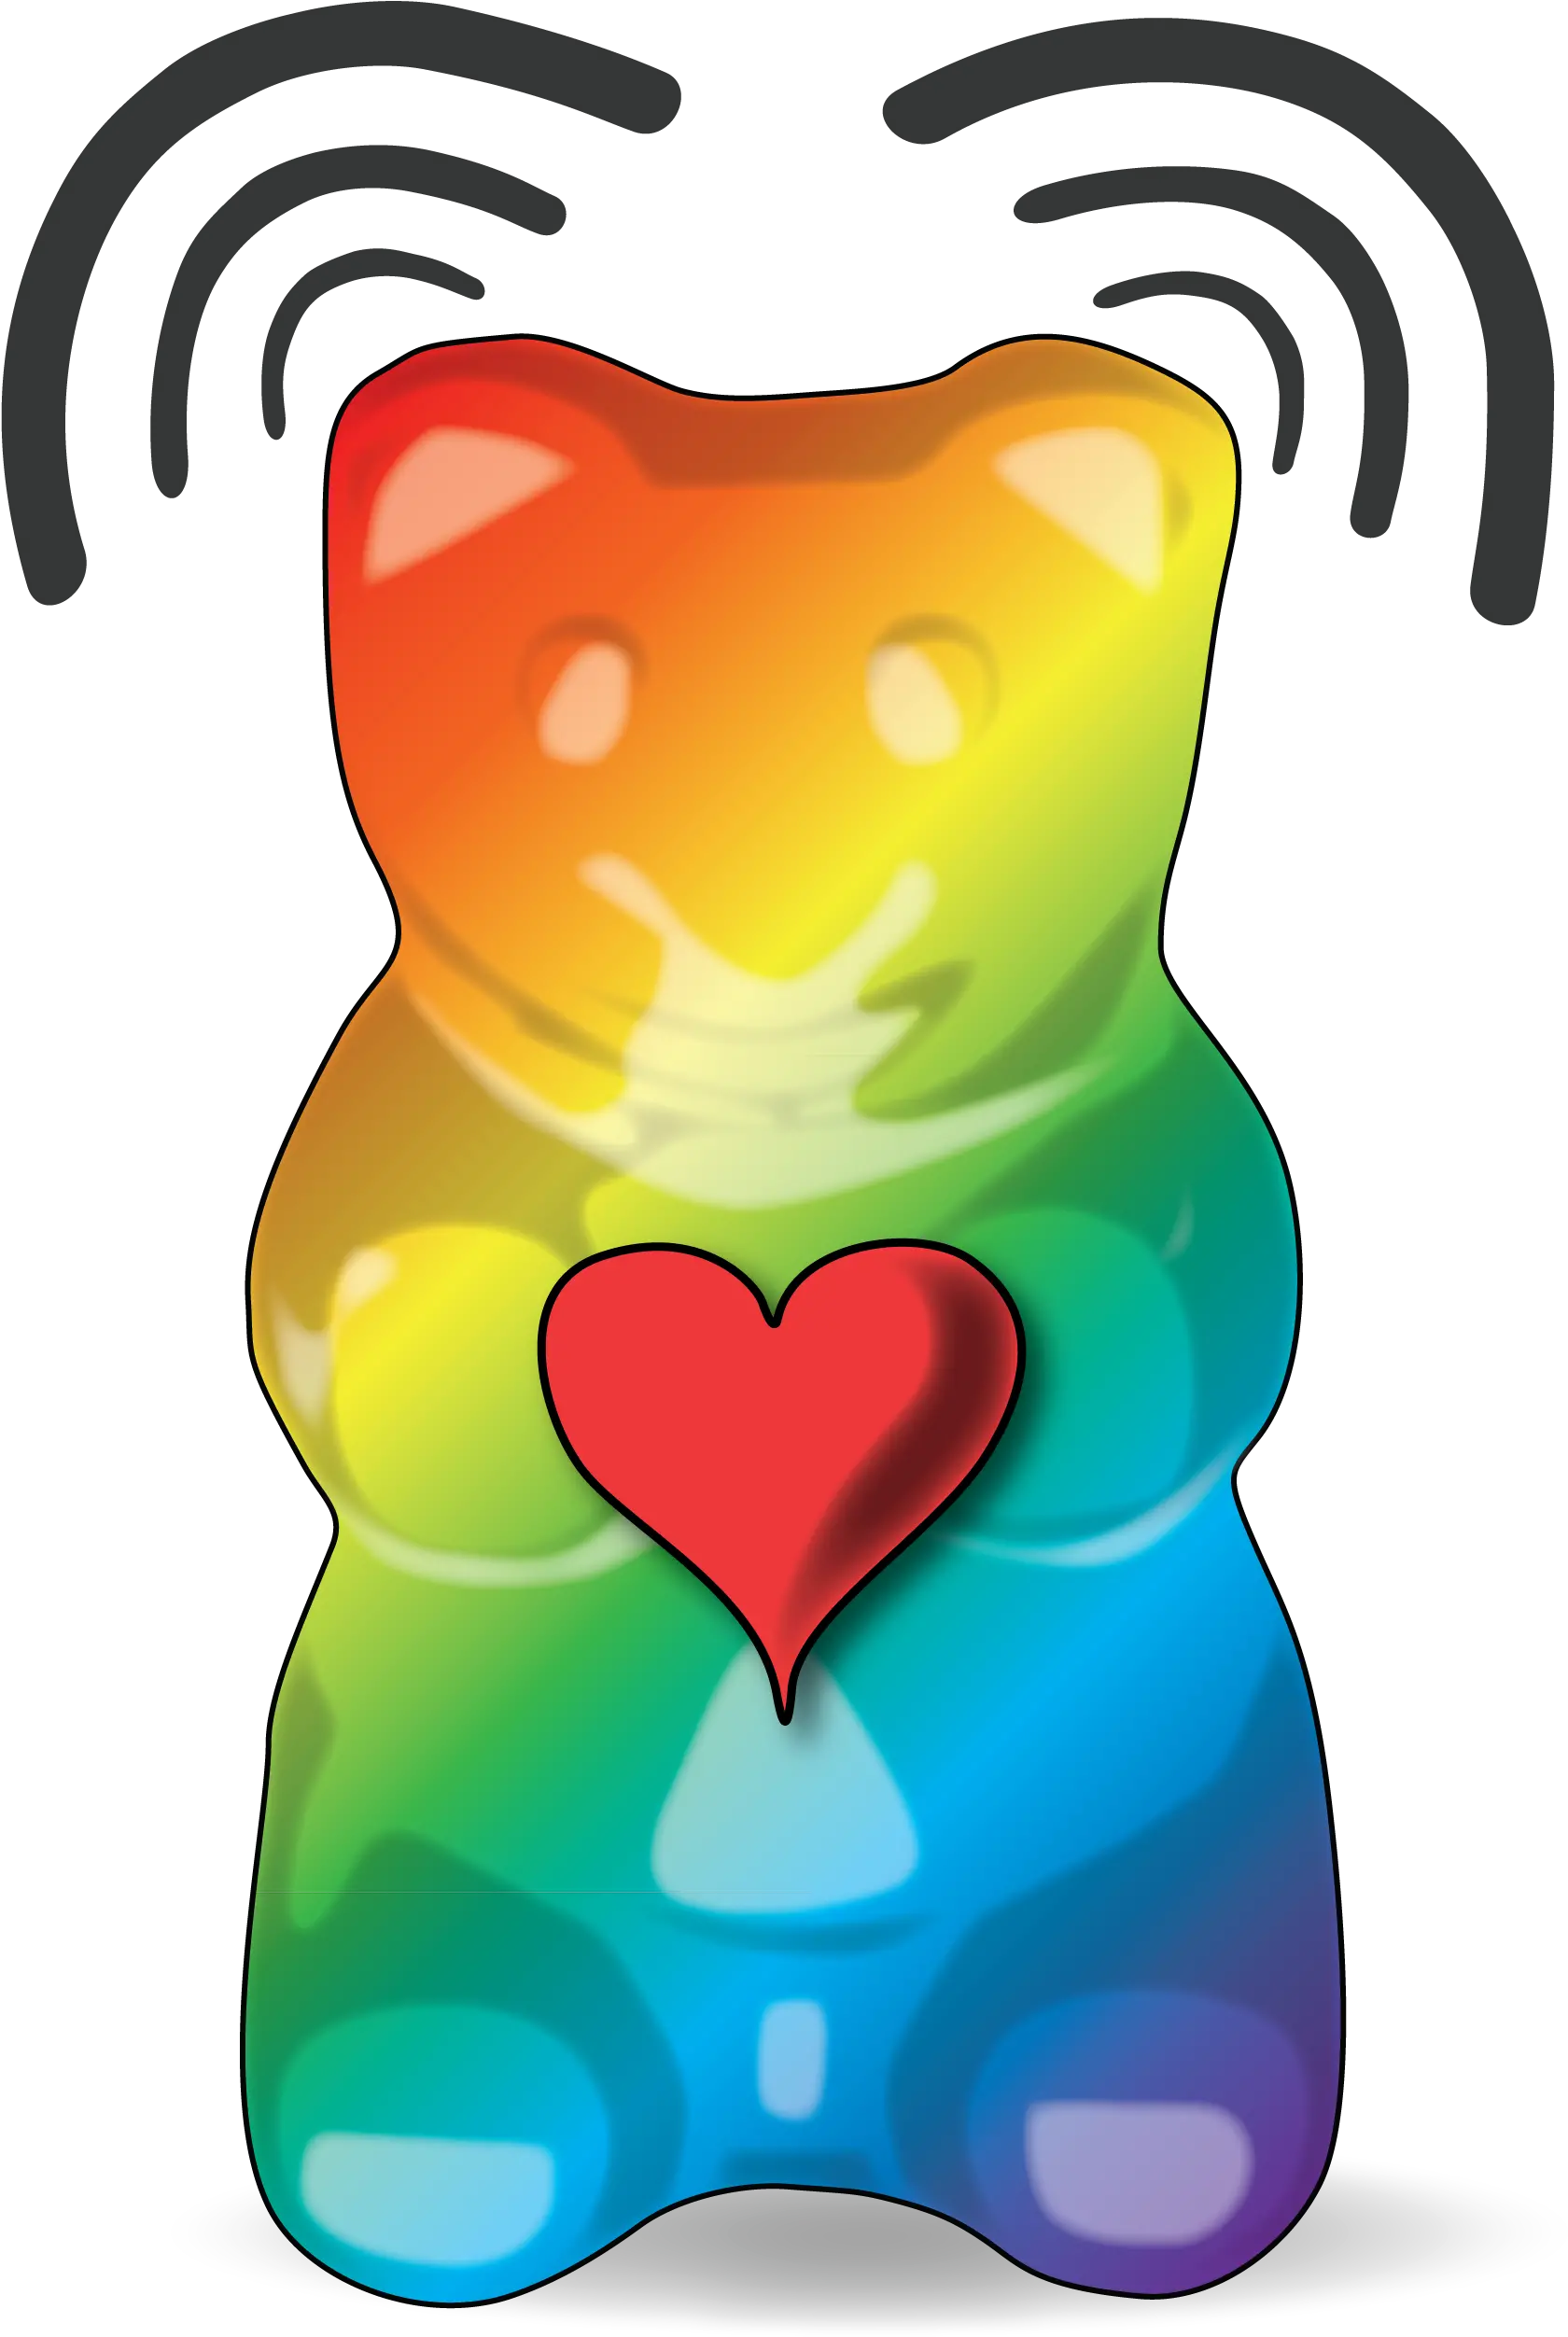 Colorful Gummy Bear Png 30426 Free Icons And Png Backgrounds Cute Gummy Bears Cartoon Colorful Png